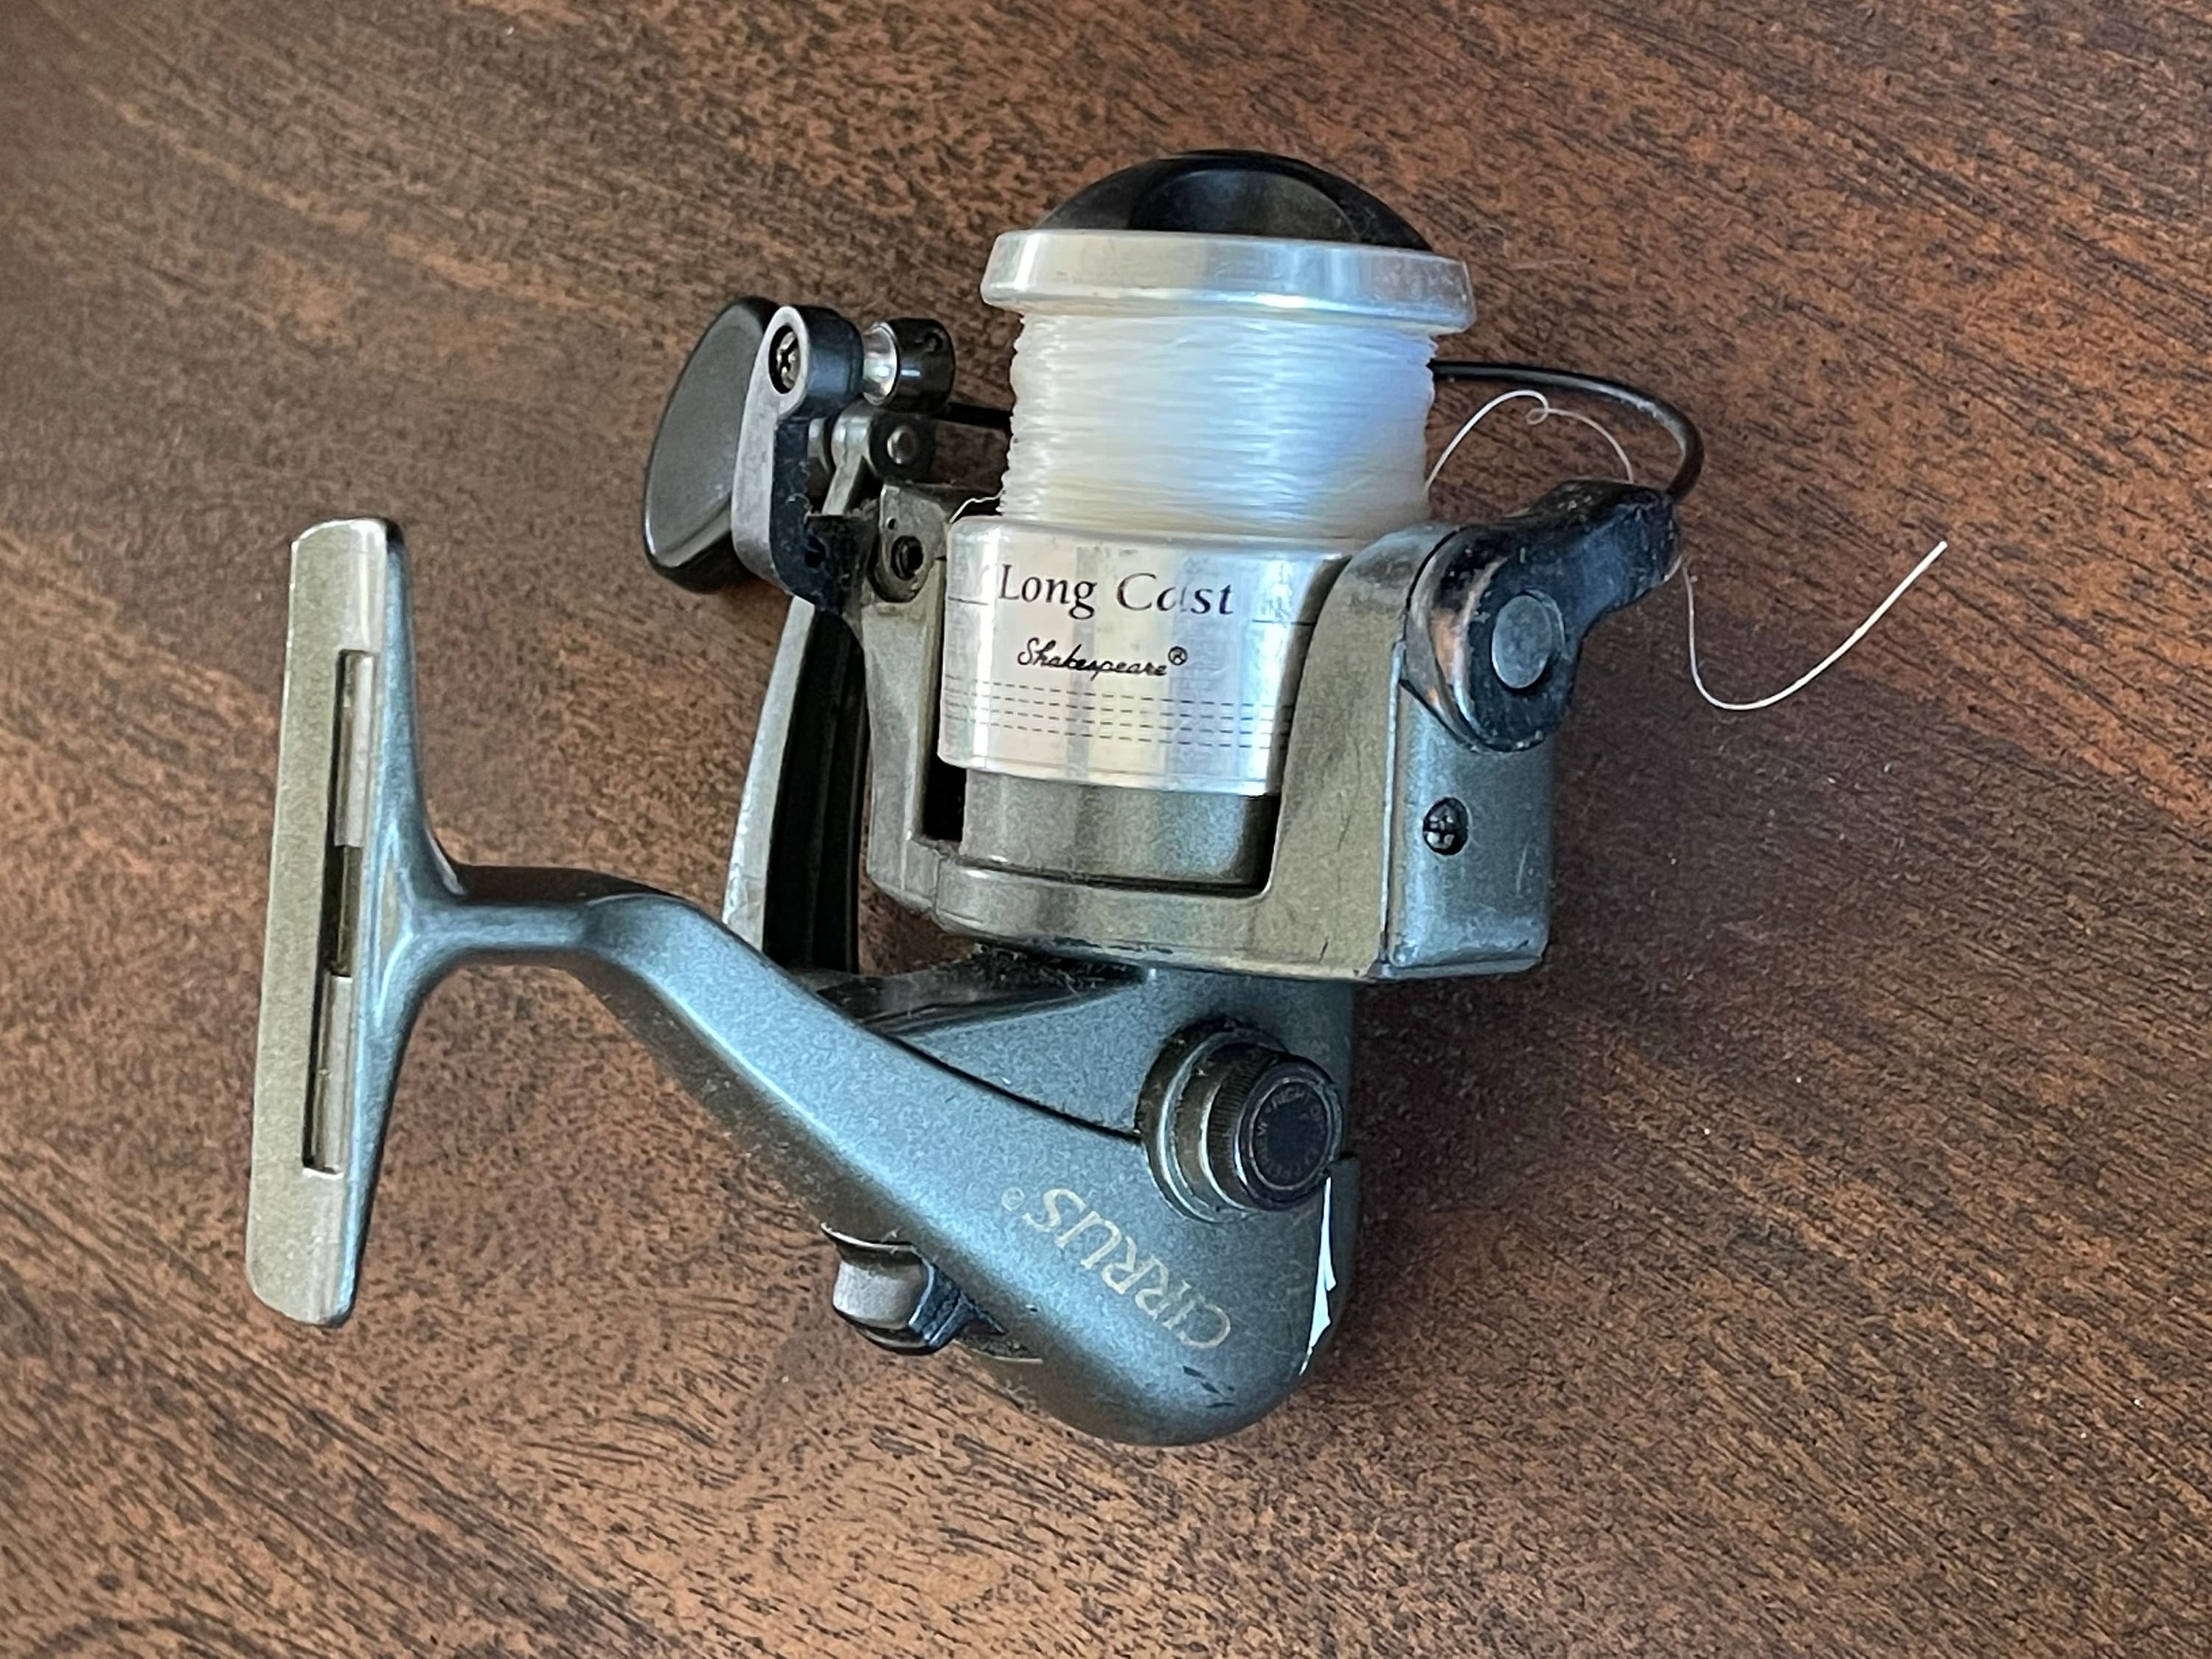 Vintage Shakespeare Cirrus ALX CS-35, Long Cast Fishing Reel, Ball Bearing  / Right or Left Retrieve / Vintage Fishing Collectible / Mancave 